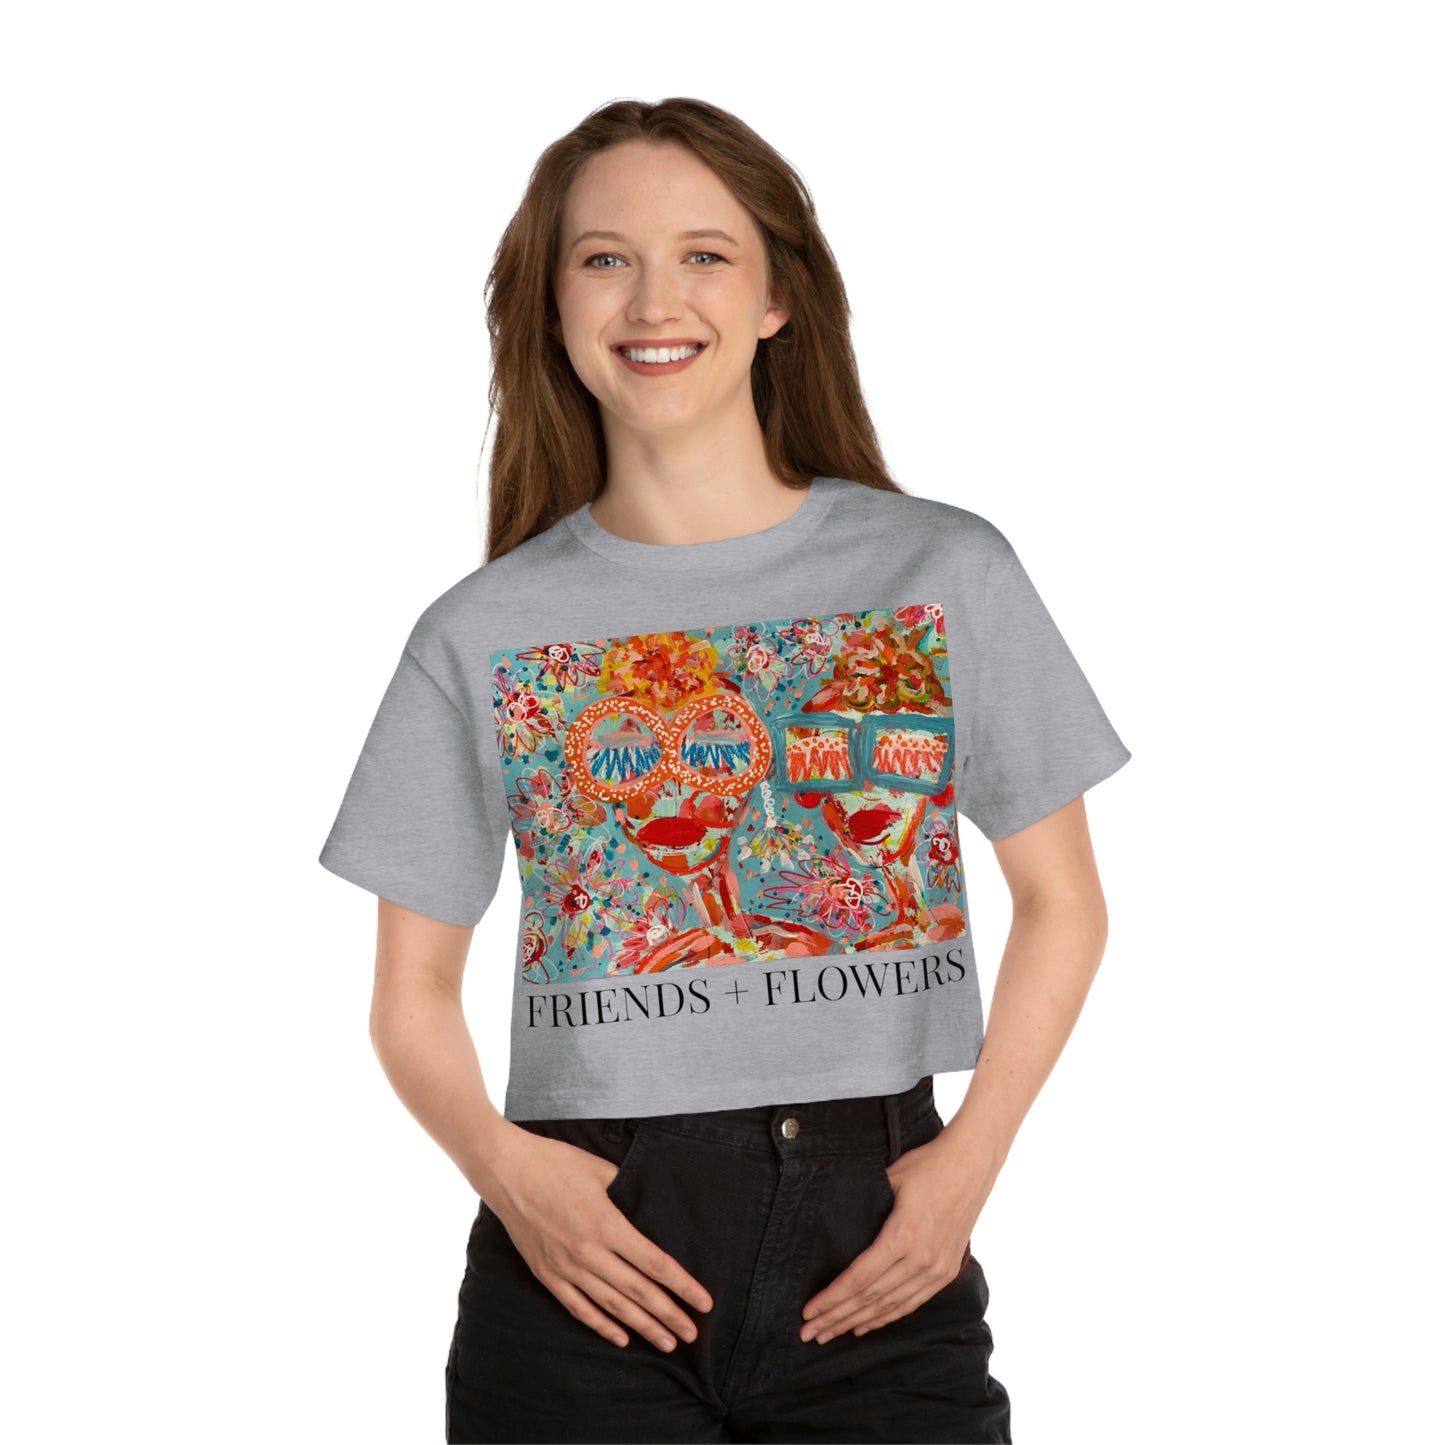 "FRIENDS + FLOWERS" Champion Women's Heritage Cropped T-Shirt